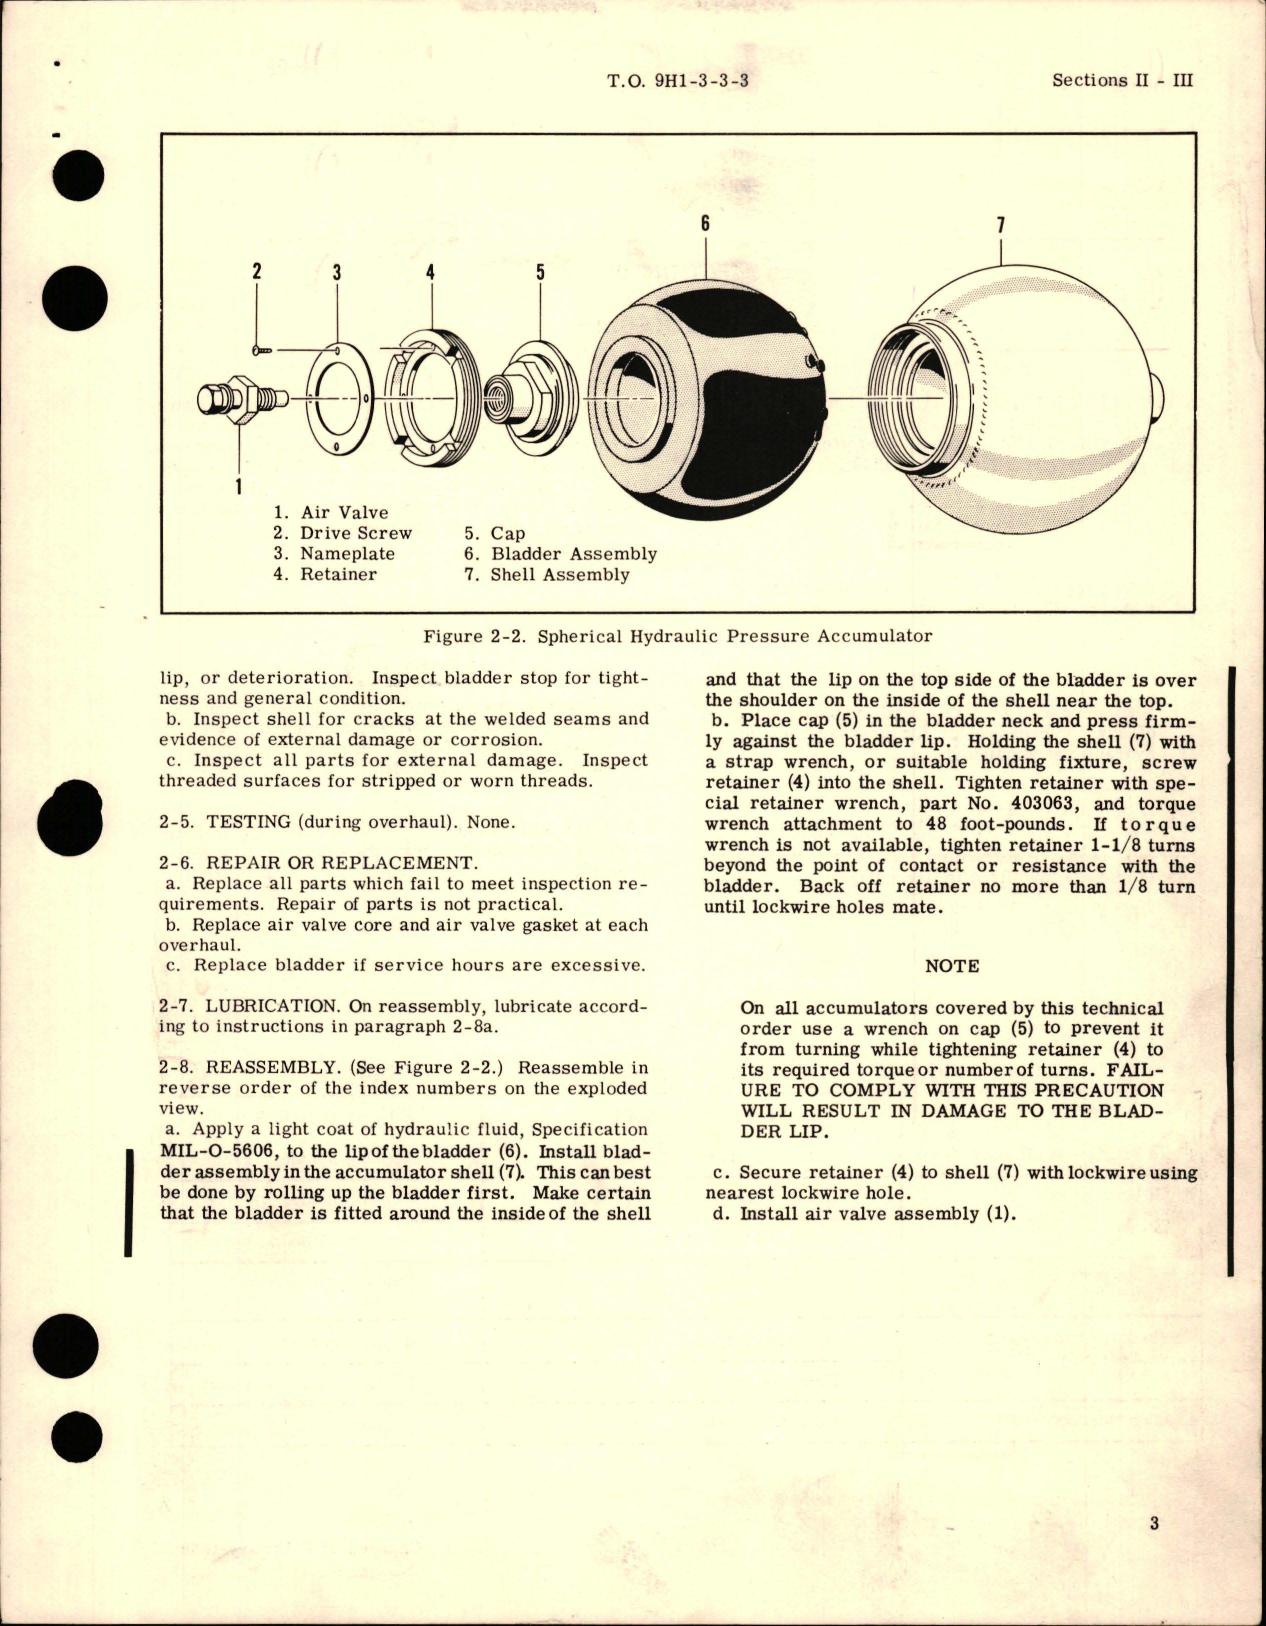 Sample page 5 from AirCorps Library document: Overhaul Instructions for Spherical Hydraulic Pressure Accumulators - 3000 PSI - Parts 405525, 405554, 406920, 406920-2, 408410